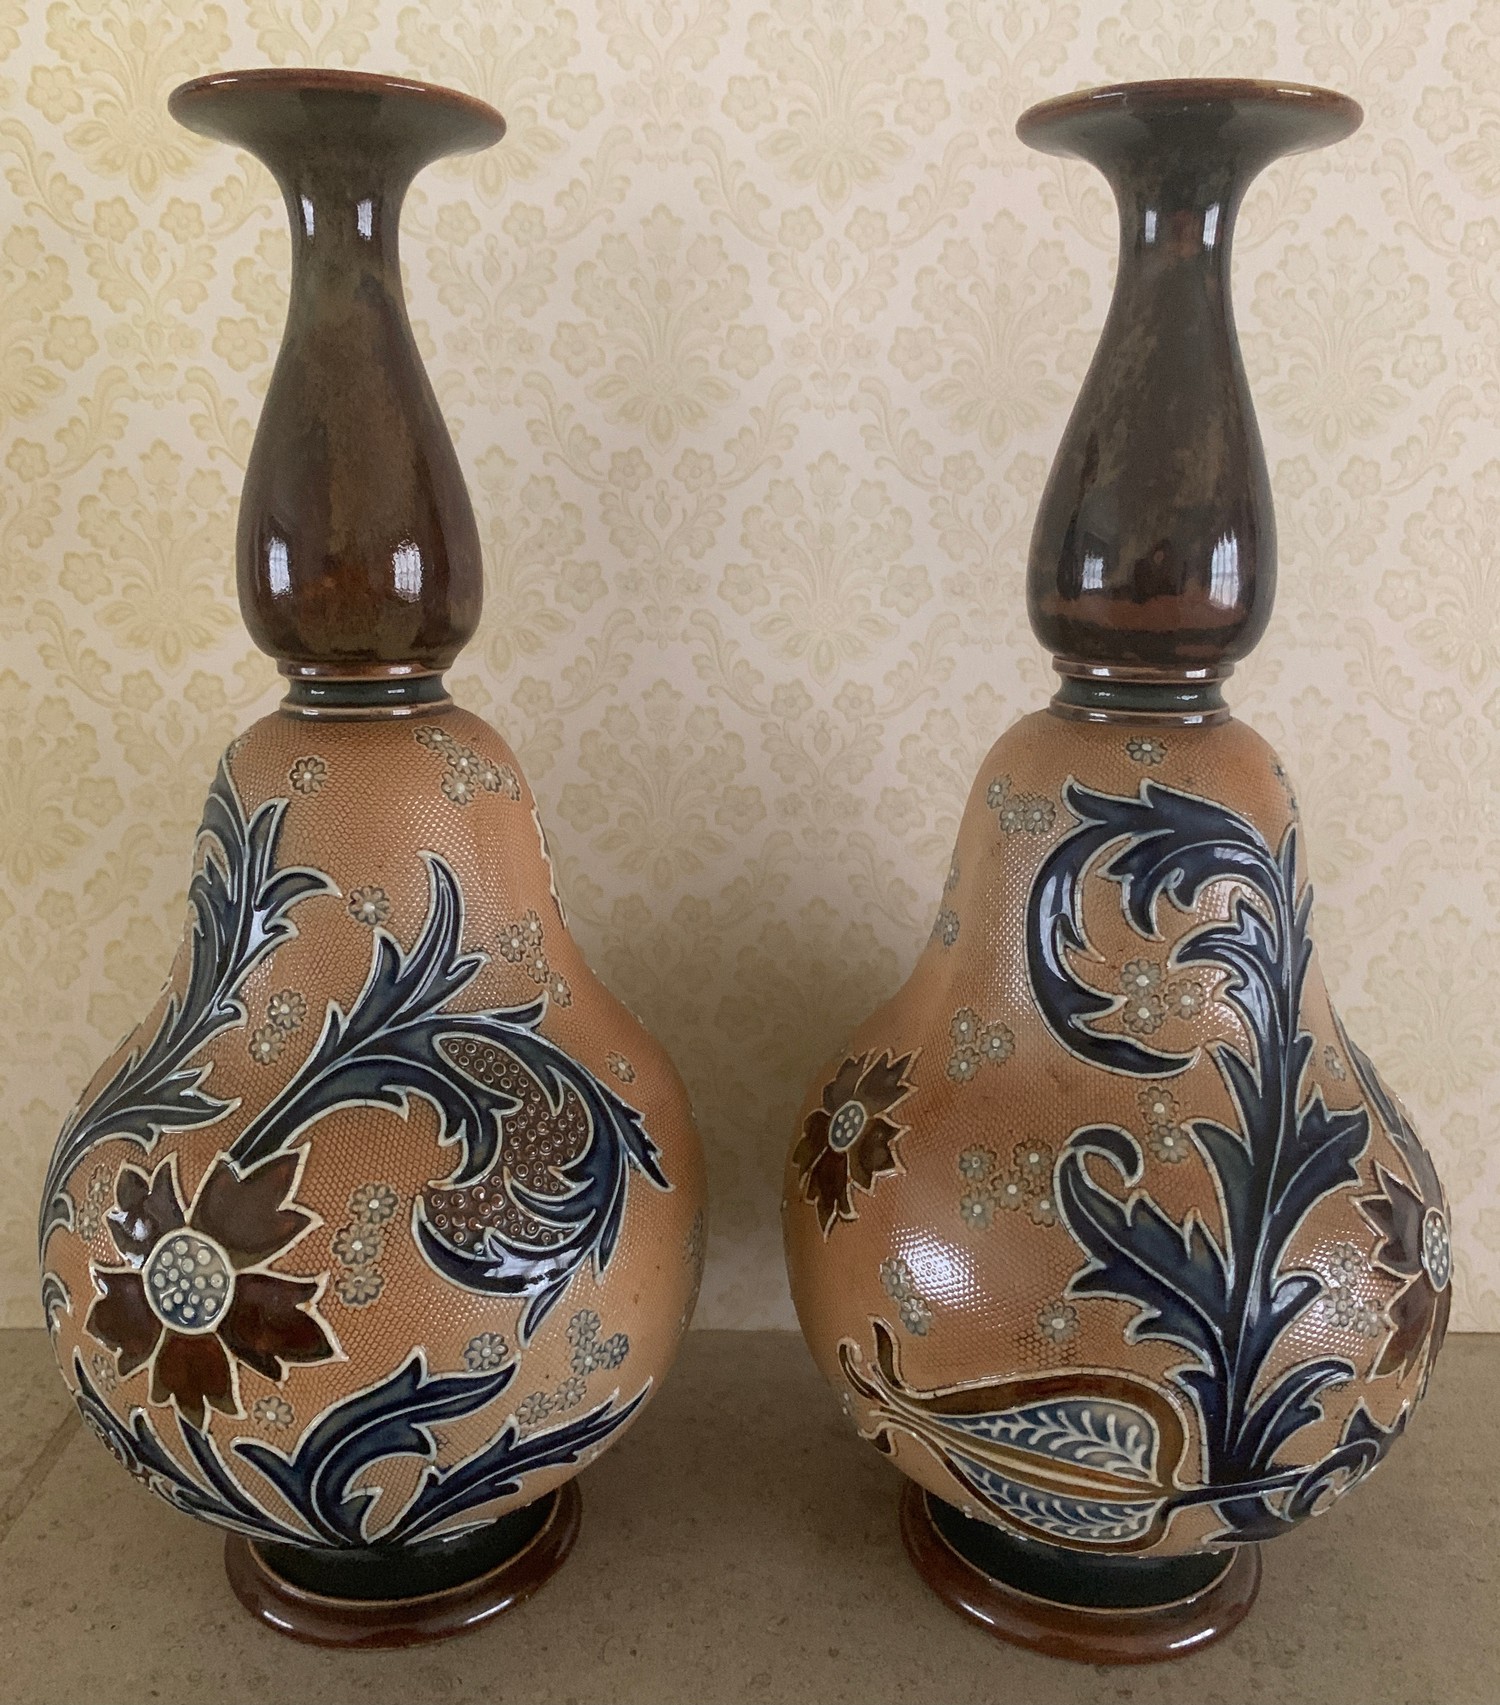 Pair of Doulton Lambeth vases. 27.5cms h.Condition ReportGood condition, no damage or repairs.